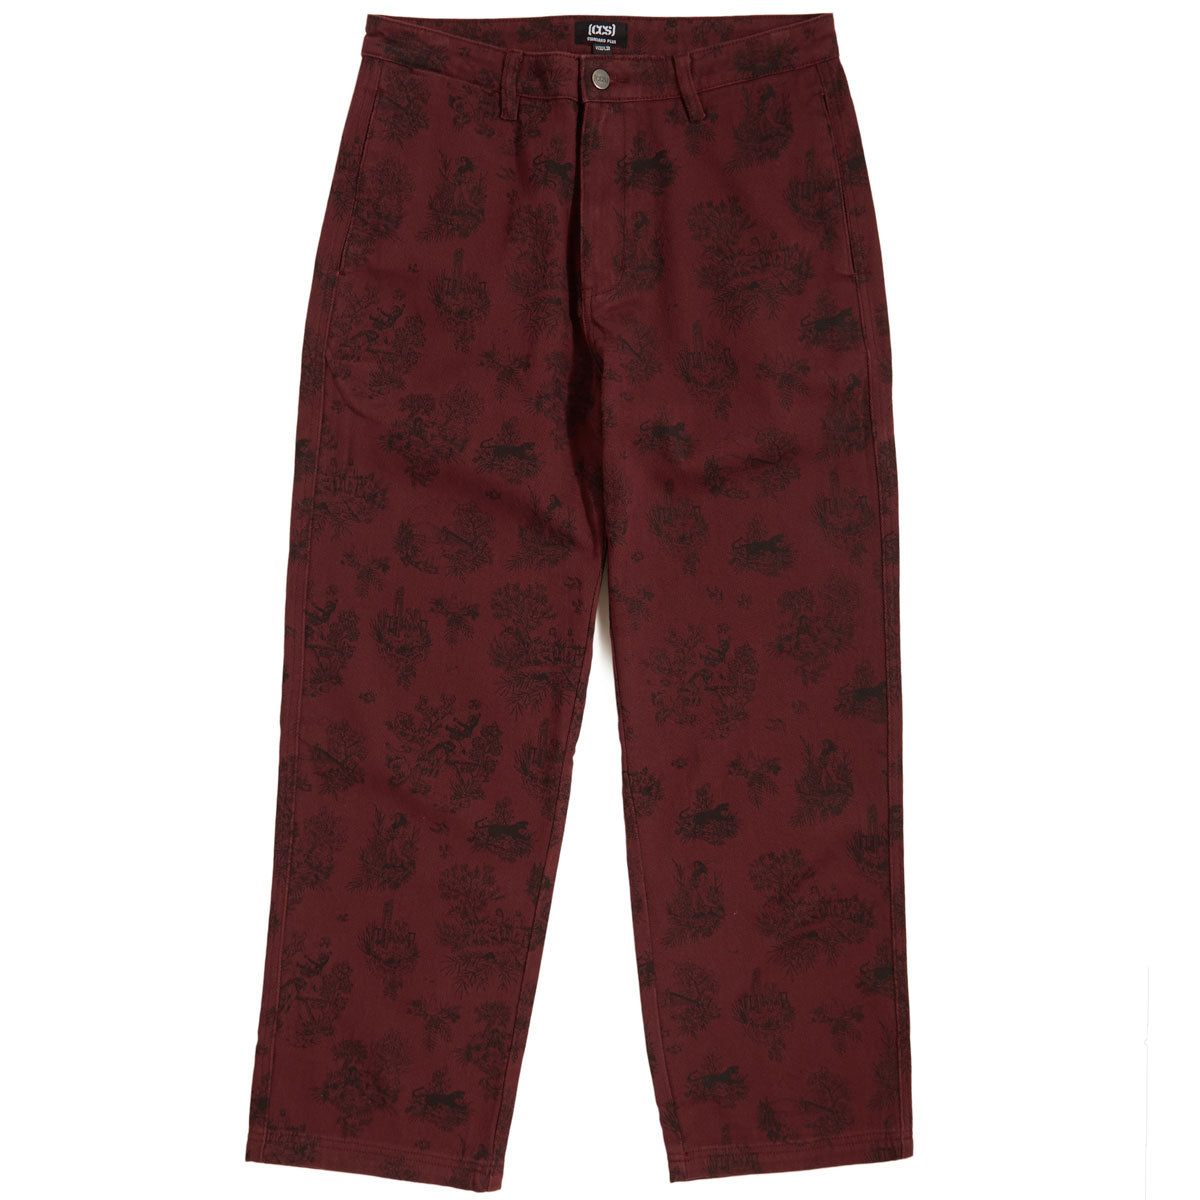 CCS Original Relaxed Toile Chino Pants - Oxblood image 1